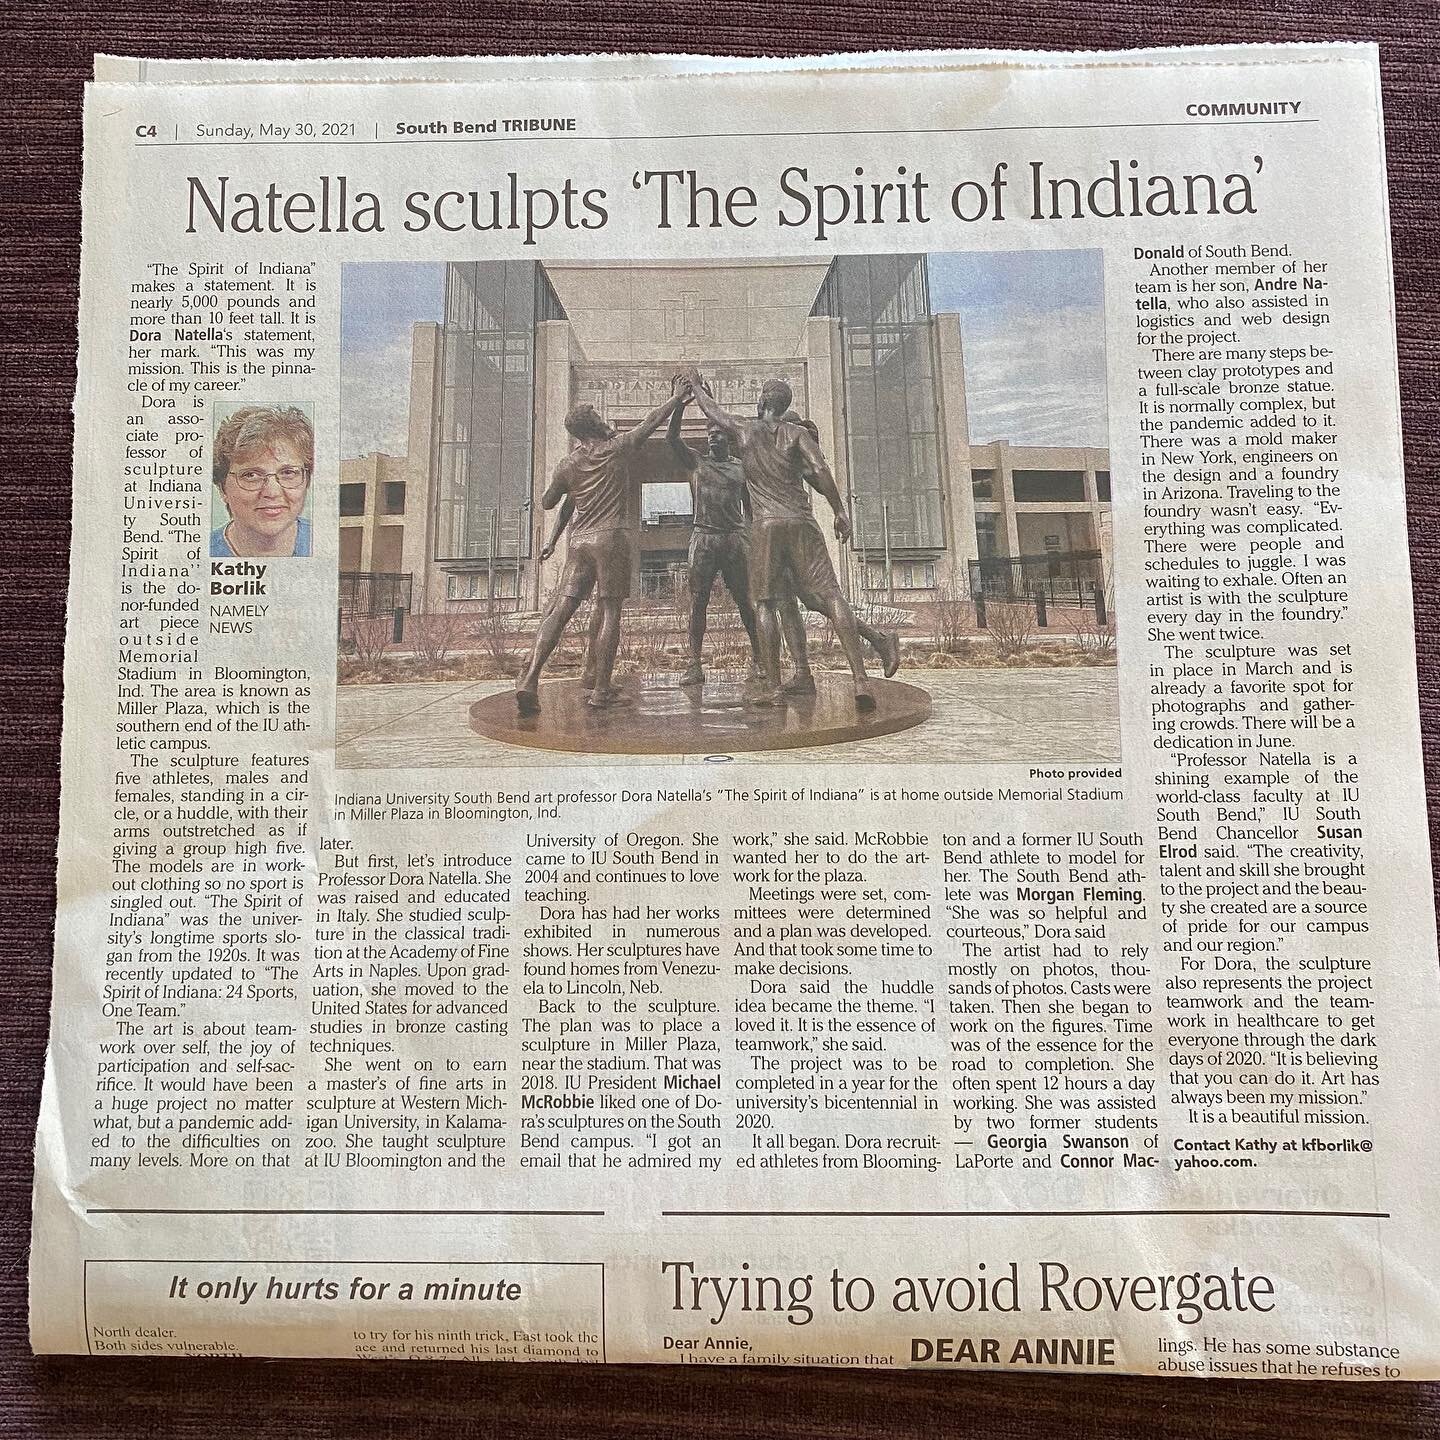 Today the South Bend Community celebrates a fabulous Memorial Day Weekend with an article &ldquo;the Spirit of Indiana&rdquo;! on the front page of the community section. I&rsquo;m over the moon about it!  #indianauniversitybloomington #iusb #artists